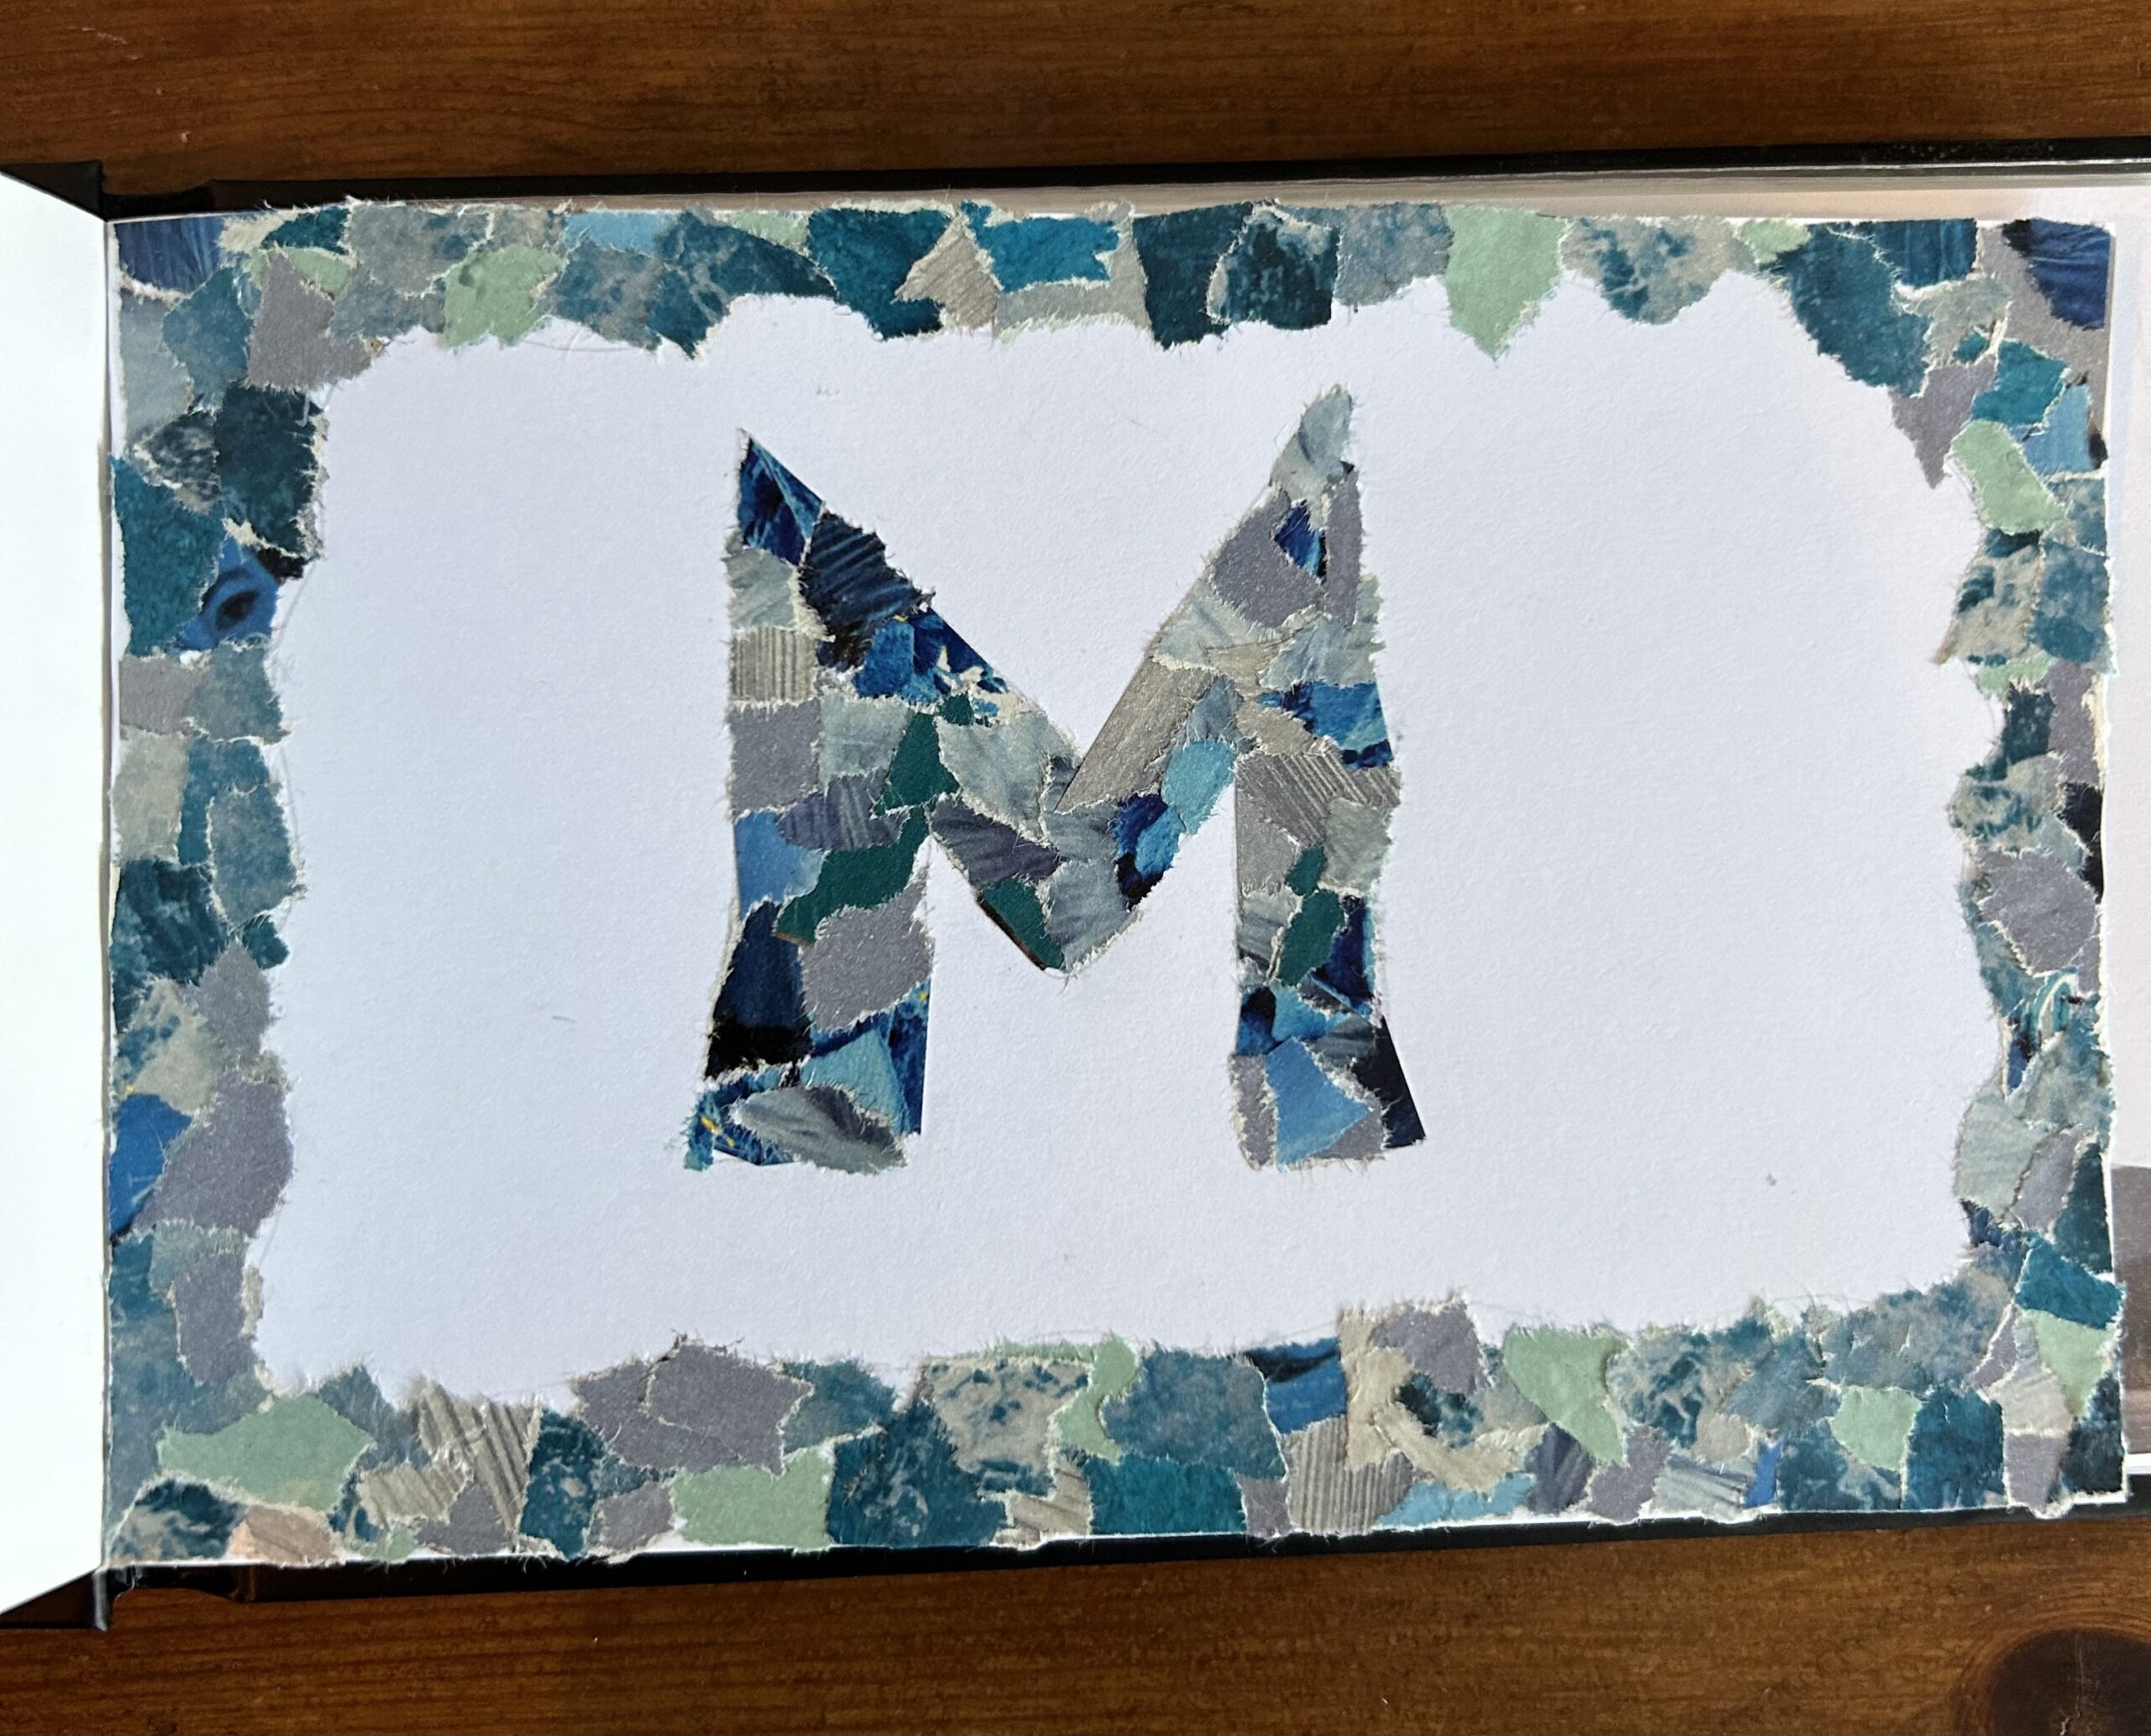 Photograph of a piece of white paper decorated with bits of blue paper collaged in the shape of the letter 'M'.